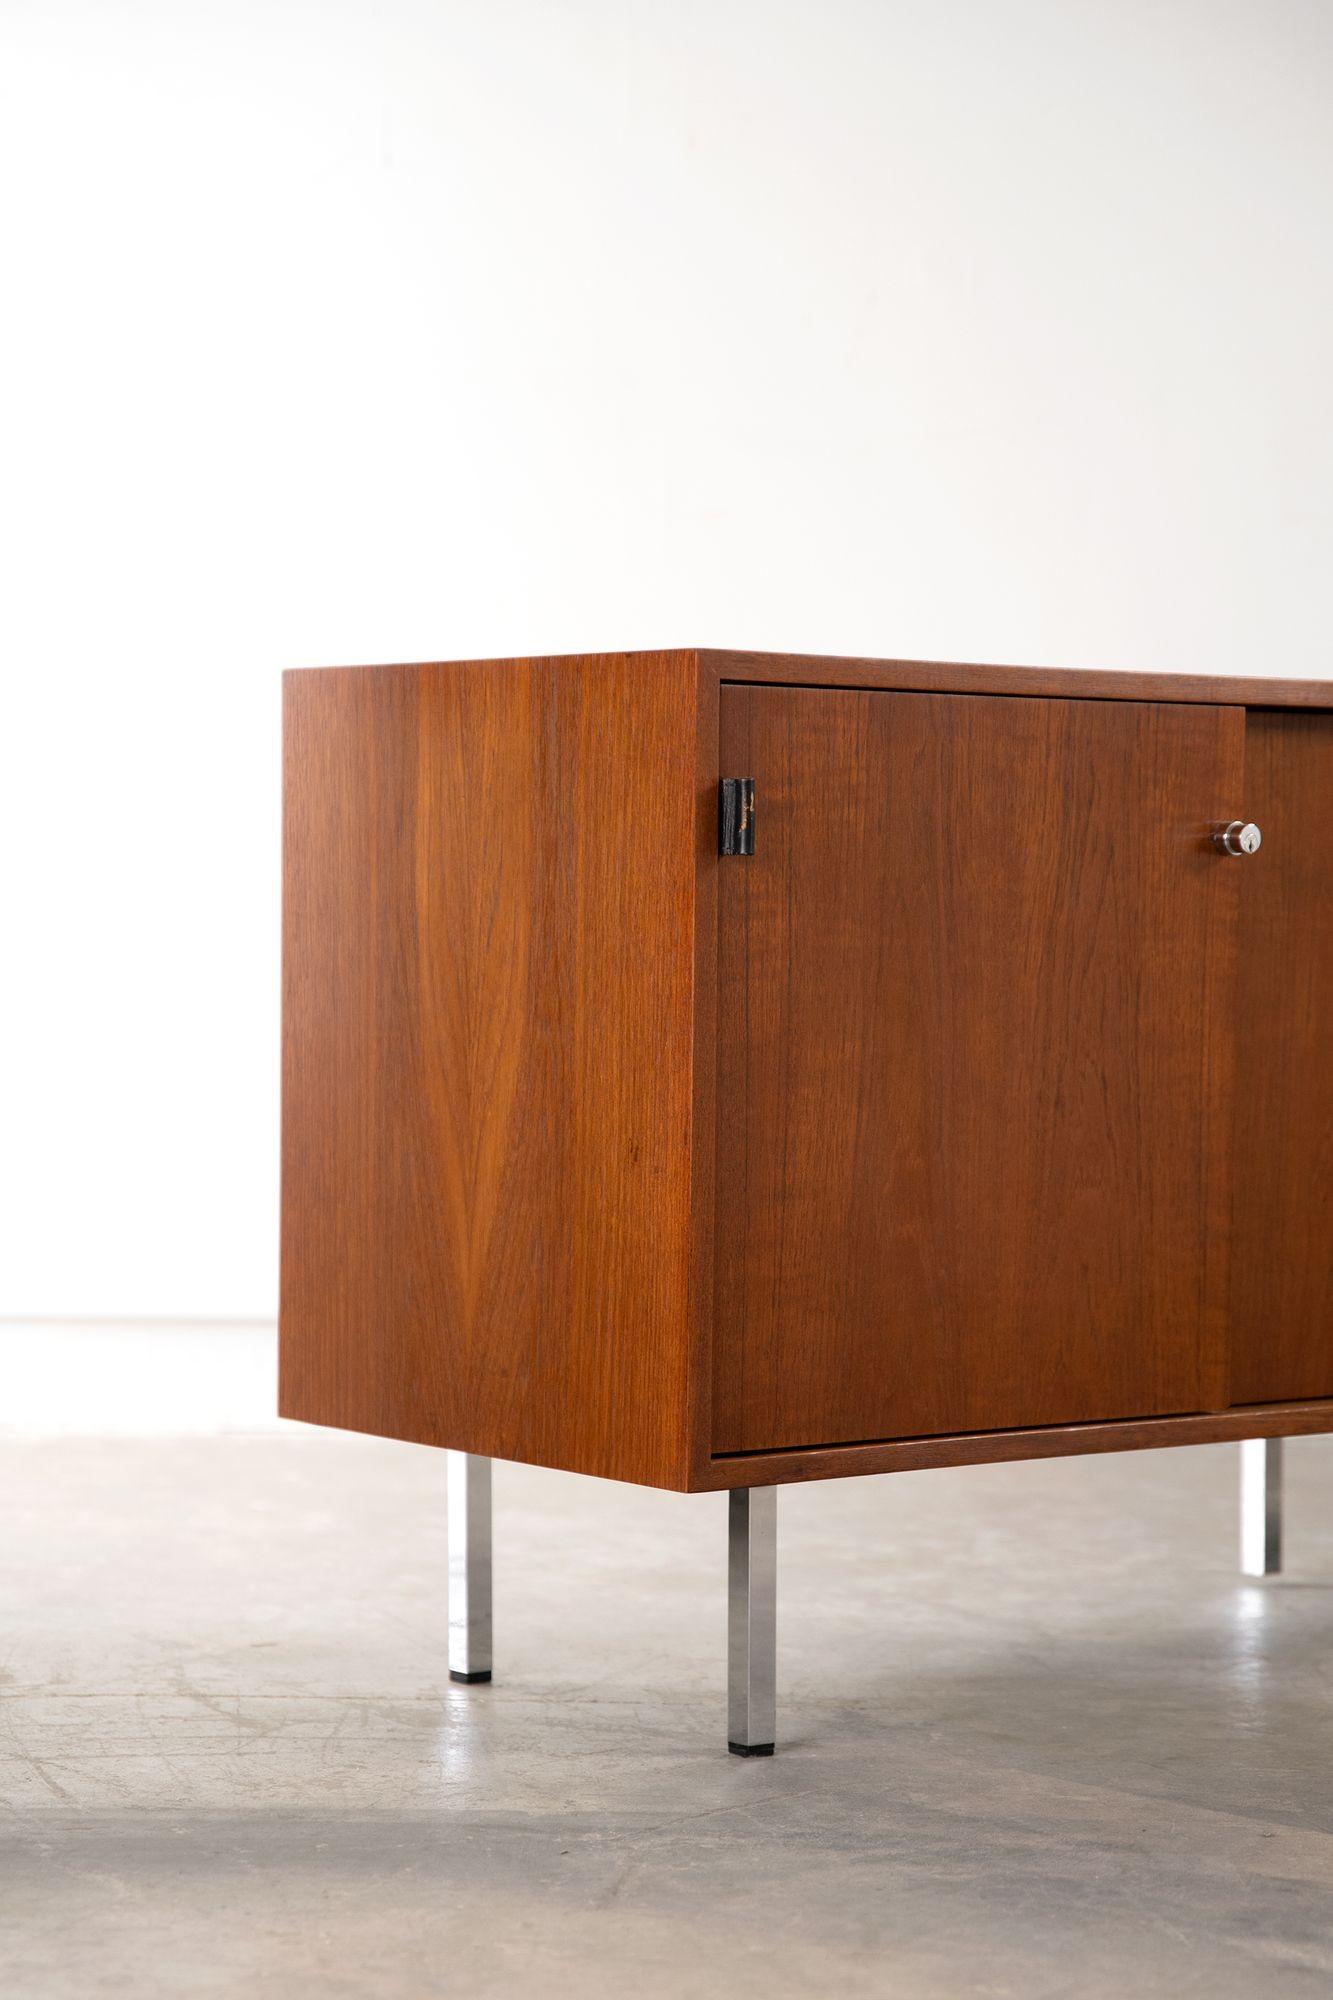 Early production, locking Credenza with teak exterior and oak interior designed by Florence Knoll for Knoll & Associates. 
This is a beautiful example that has been refinished to the highest possible standard.